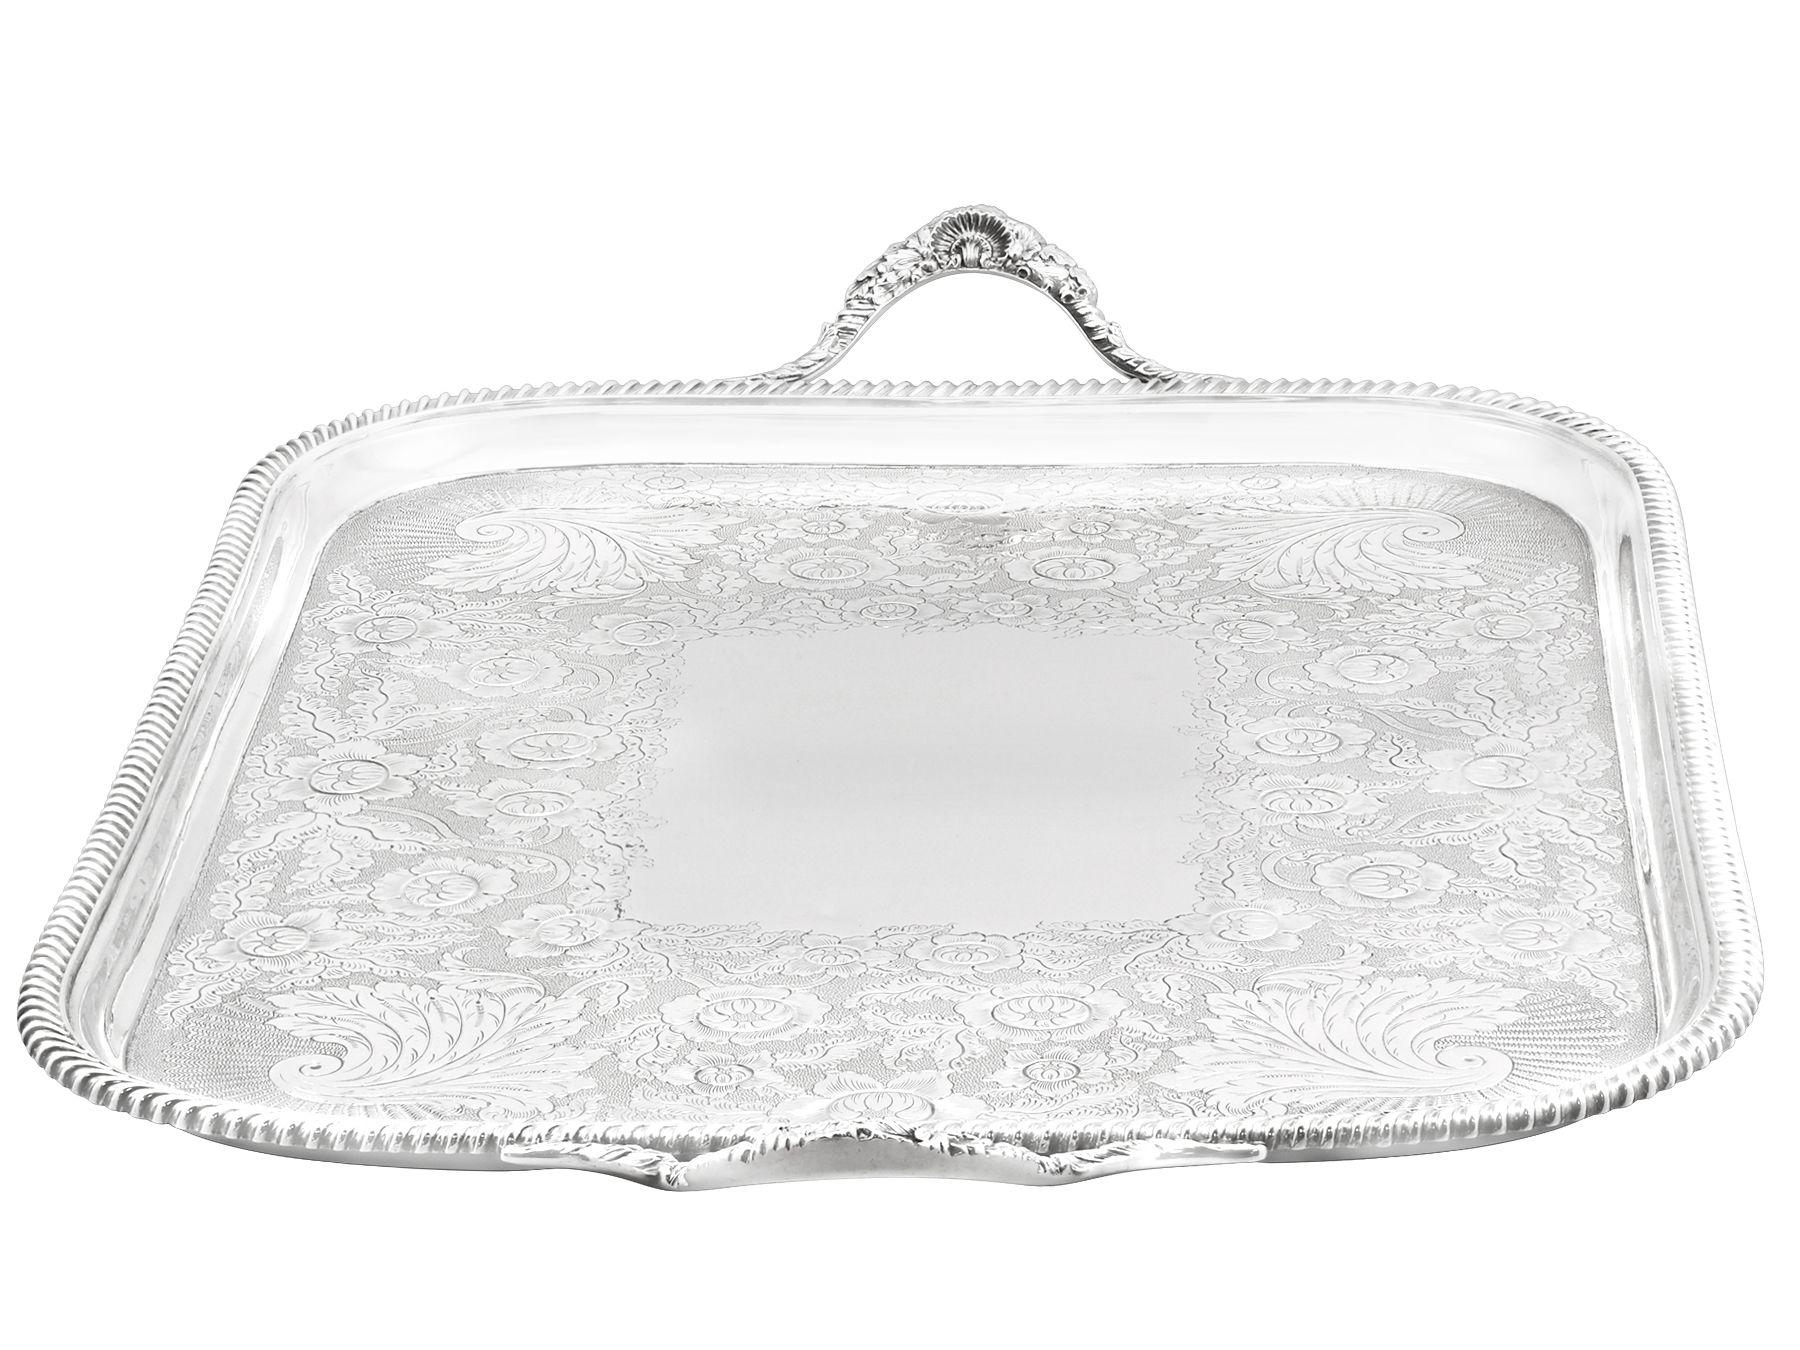 Antique Victorian Sterling Silver Tray by Thomas Bradbury & Sons In Excellent Condition For Sale In Jesmond, Newcastle Upon Tyne